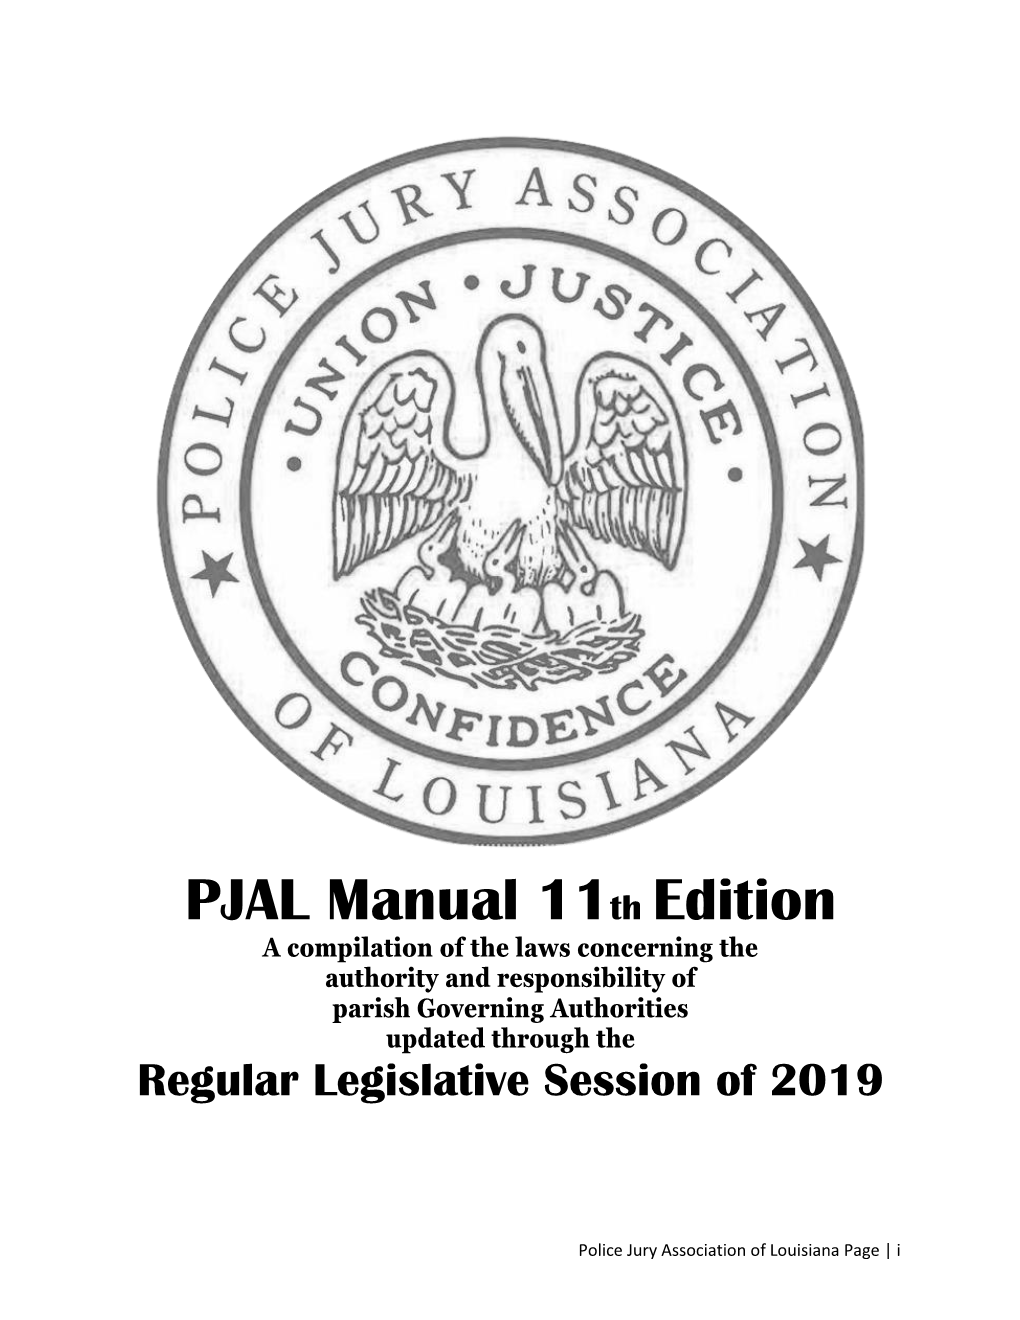 PJAL Manual 11Th Edition a Compilation of the Laws Concerning the Authority and Responsibility of Parish Governing Authorities Updated Through The